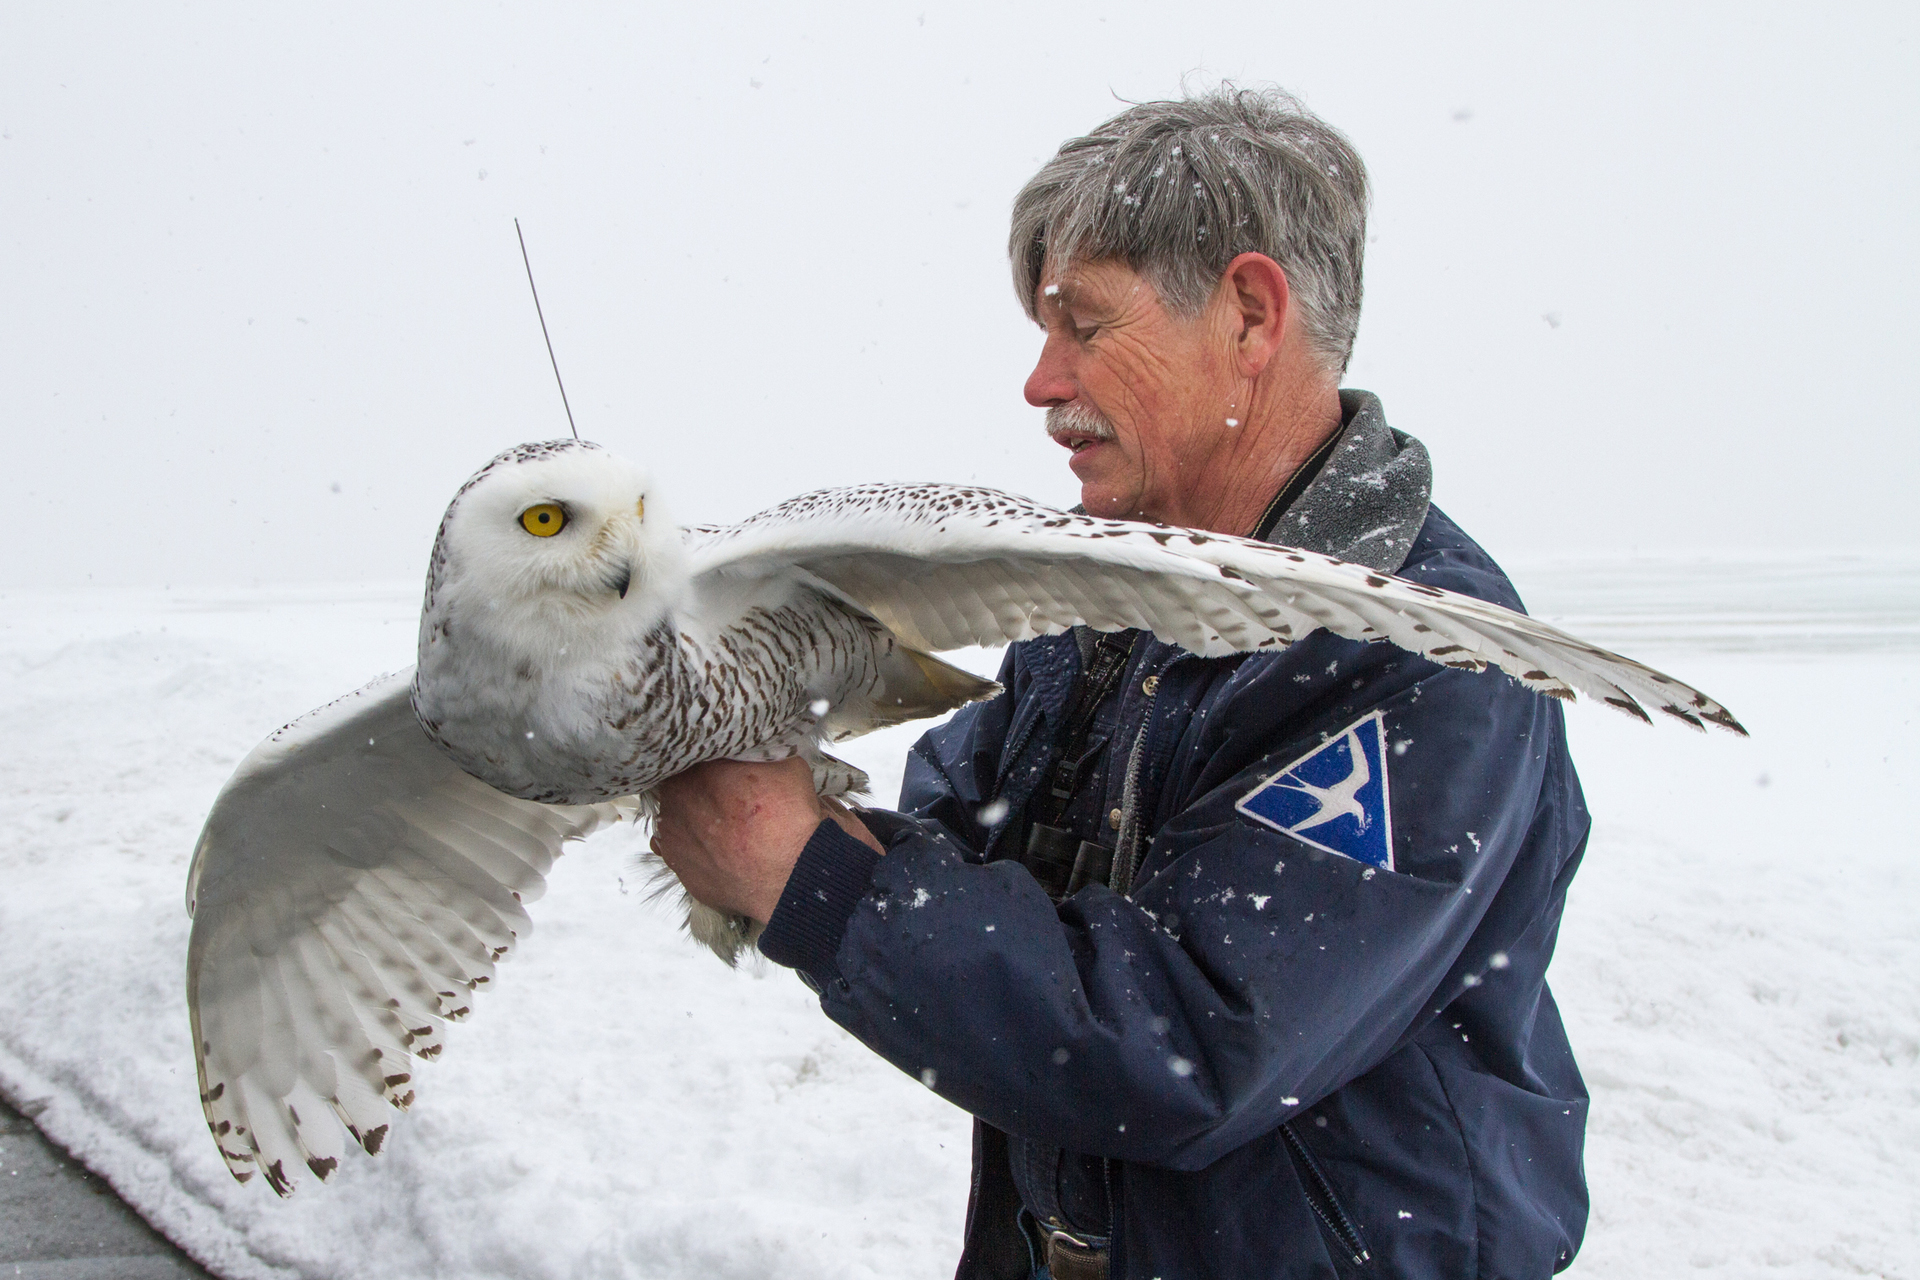 Norman Smith holding a Snowy Owl with a transmitter